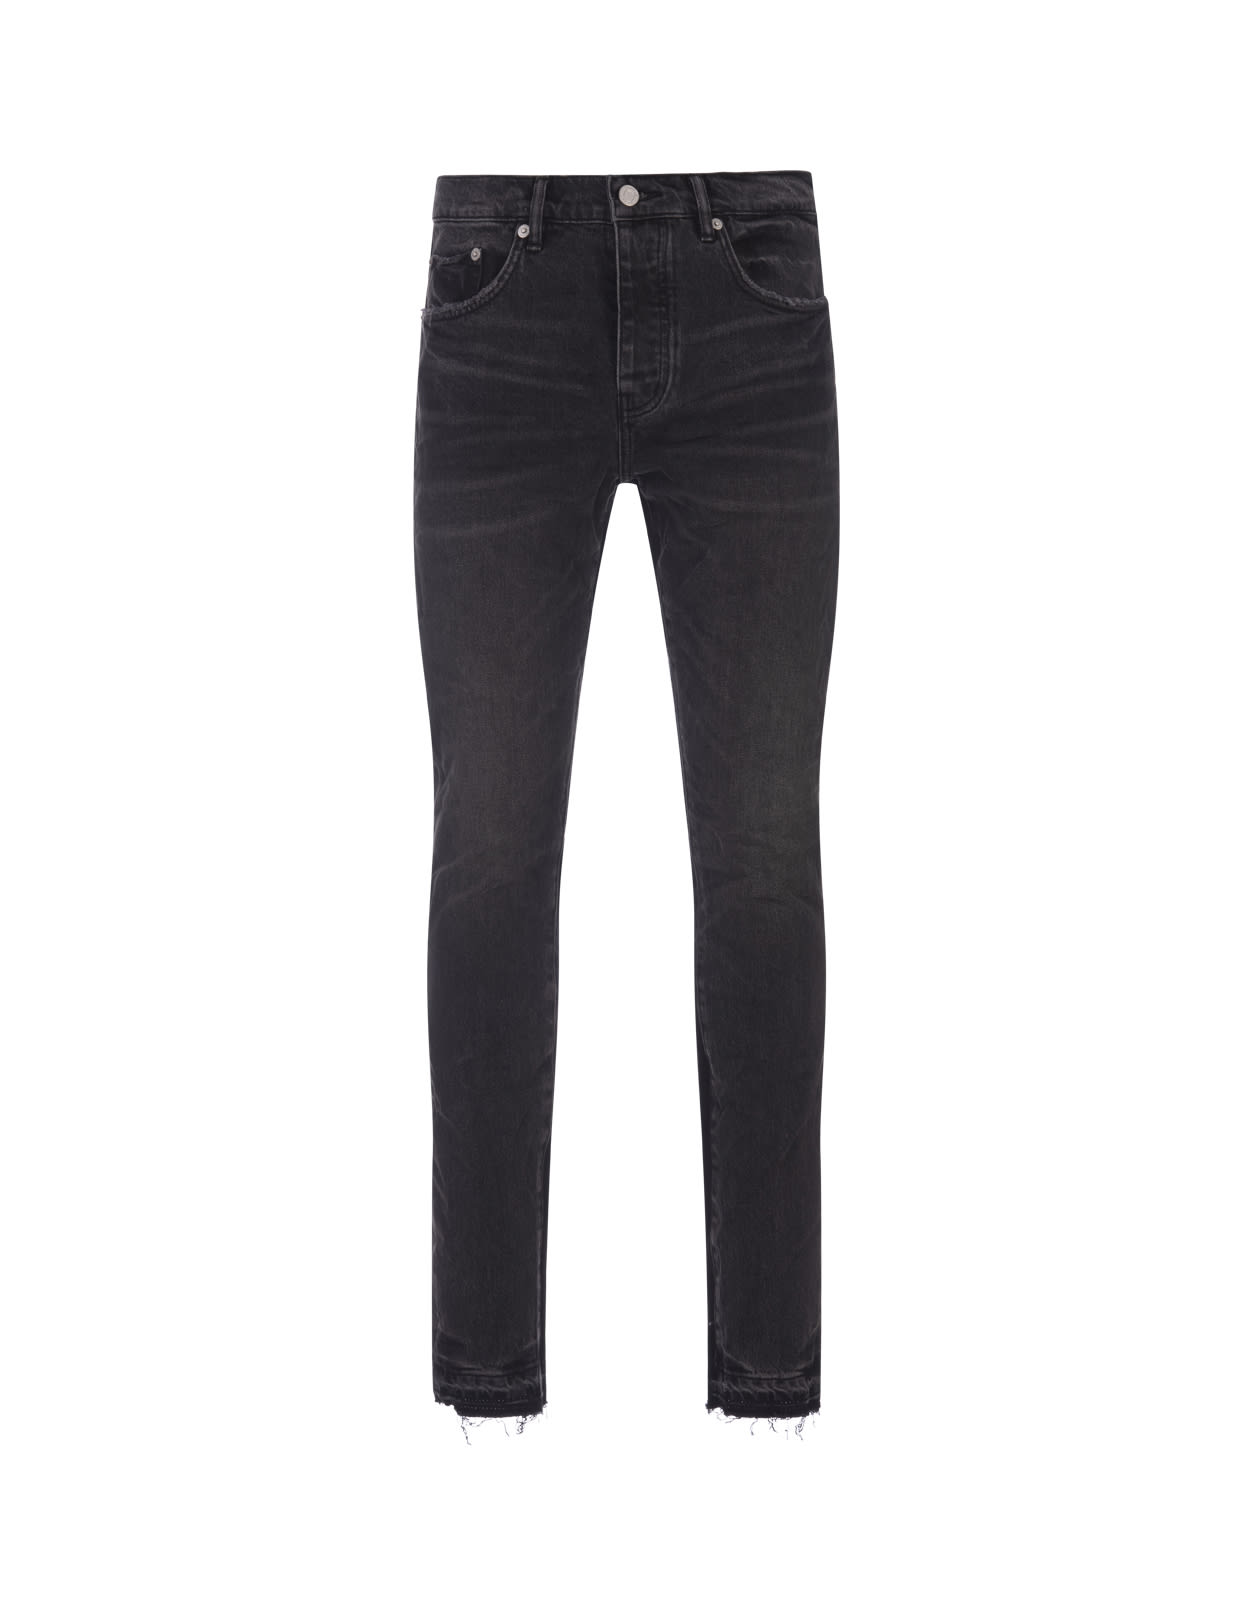 P001 Shadow Inseam Jeans In Black